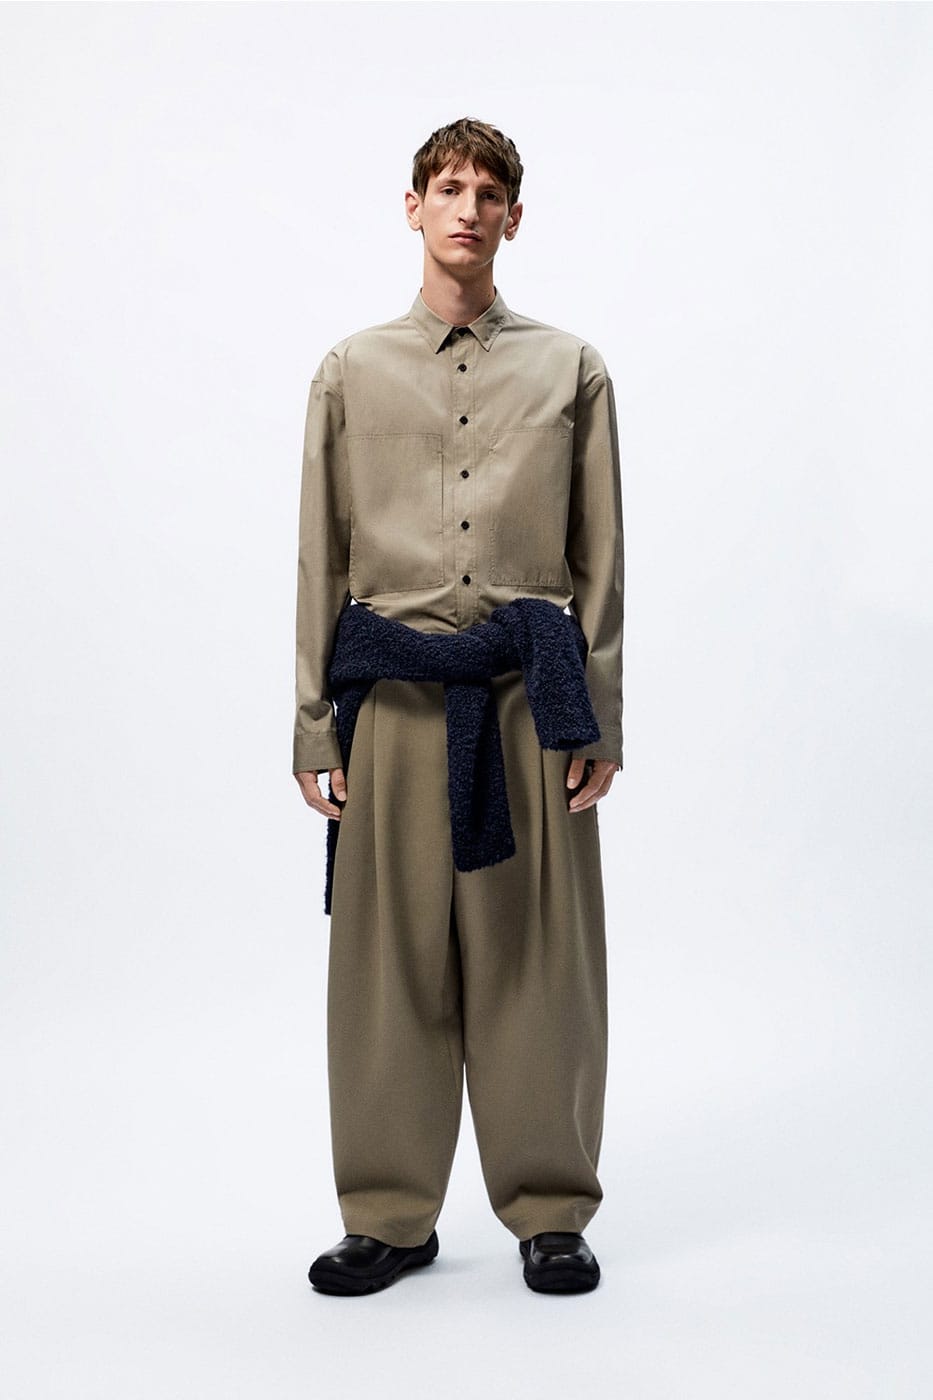 Studio Nicholson and ZARA Deliver Timeless Layers for FW22 | Hypebeast